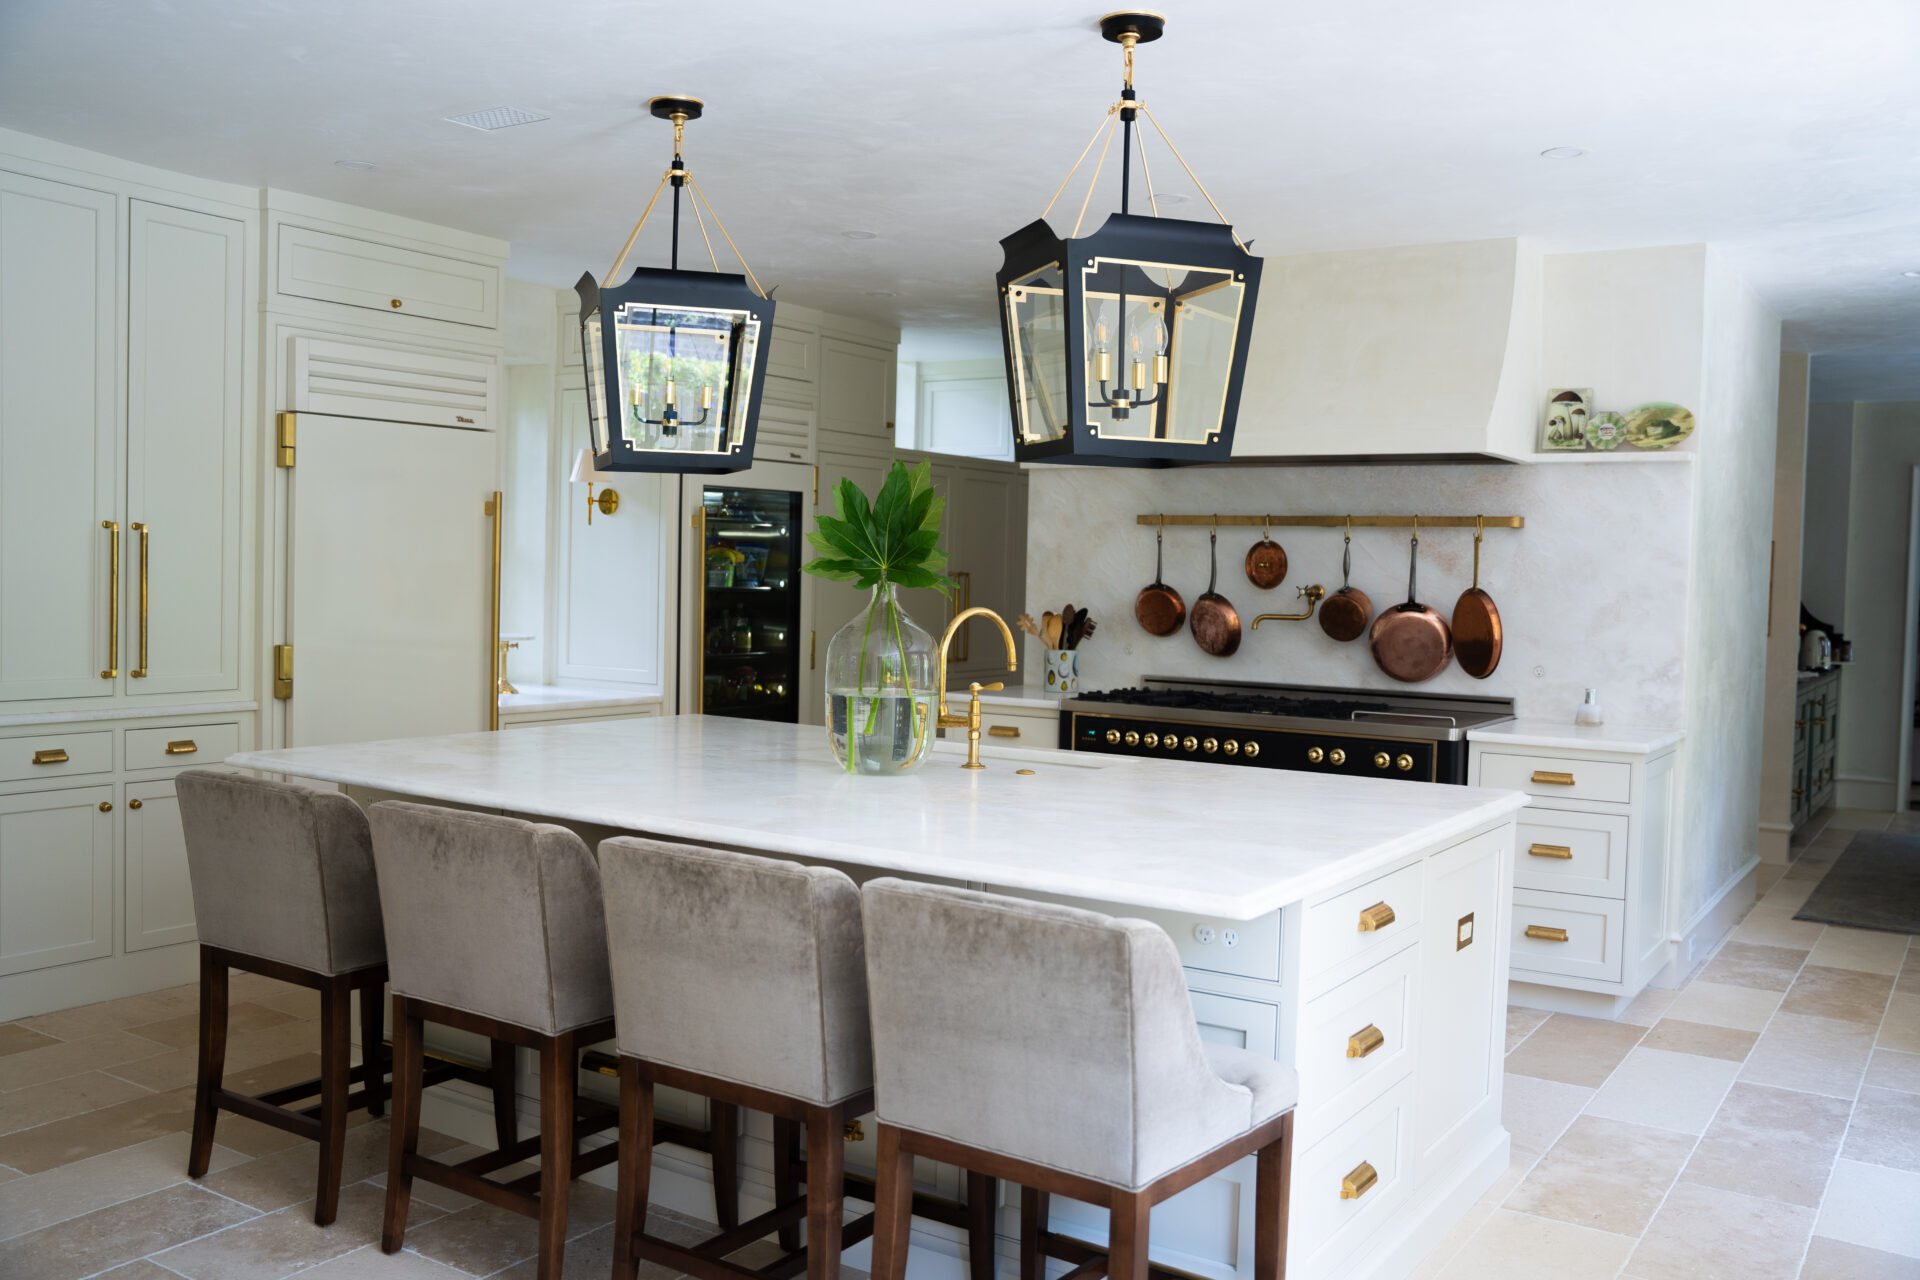 A kitchen with white cabinets and gold fixtures.